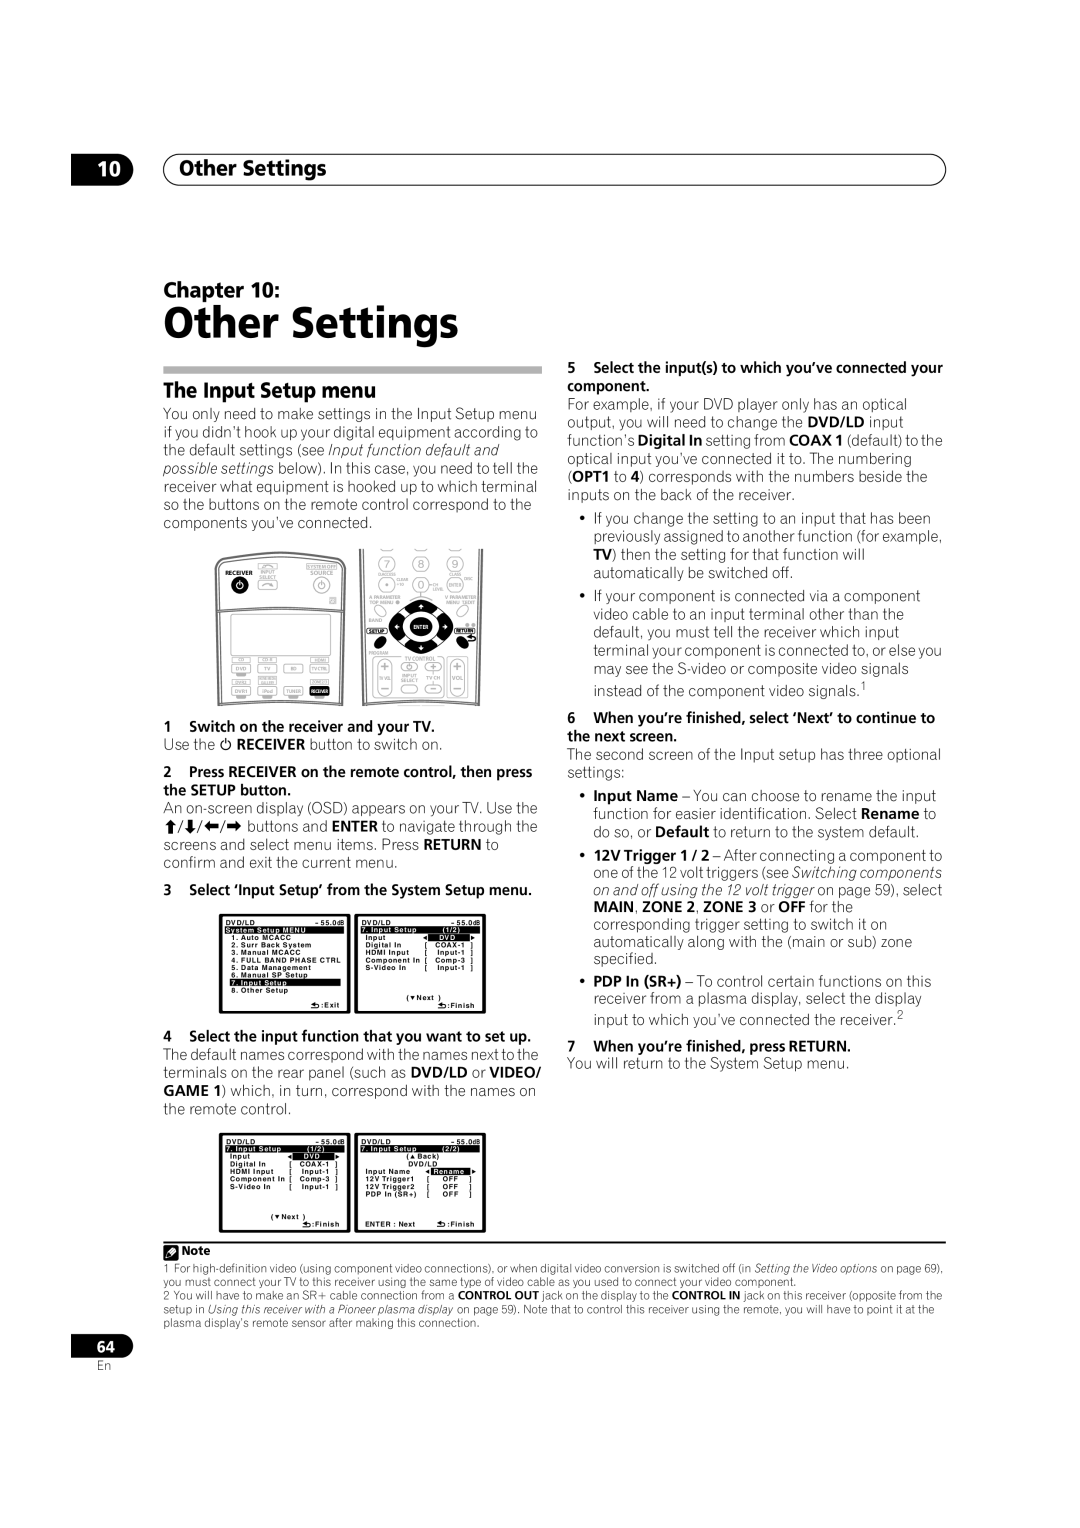 Pioneer VSX-LX70 manual 10Other Settings Chapter, The Input Setup menu 